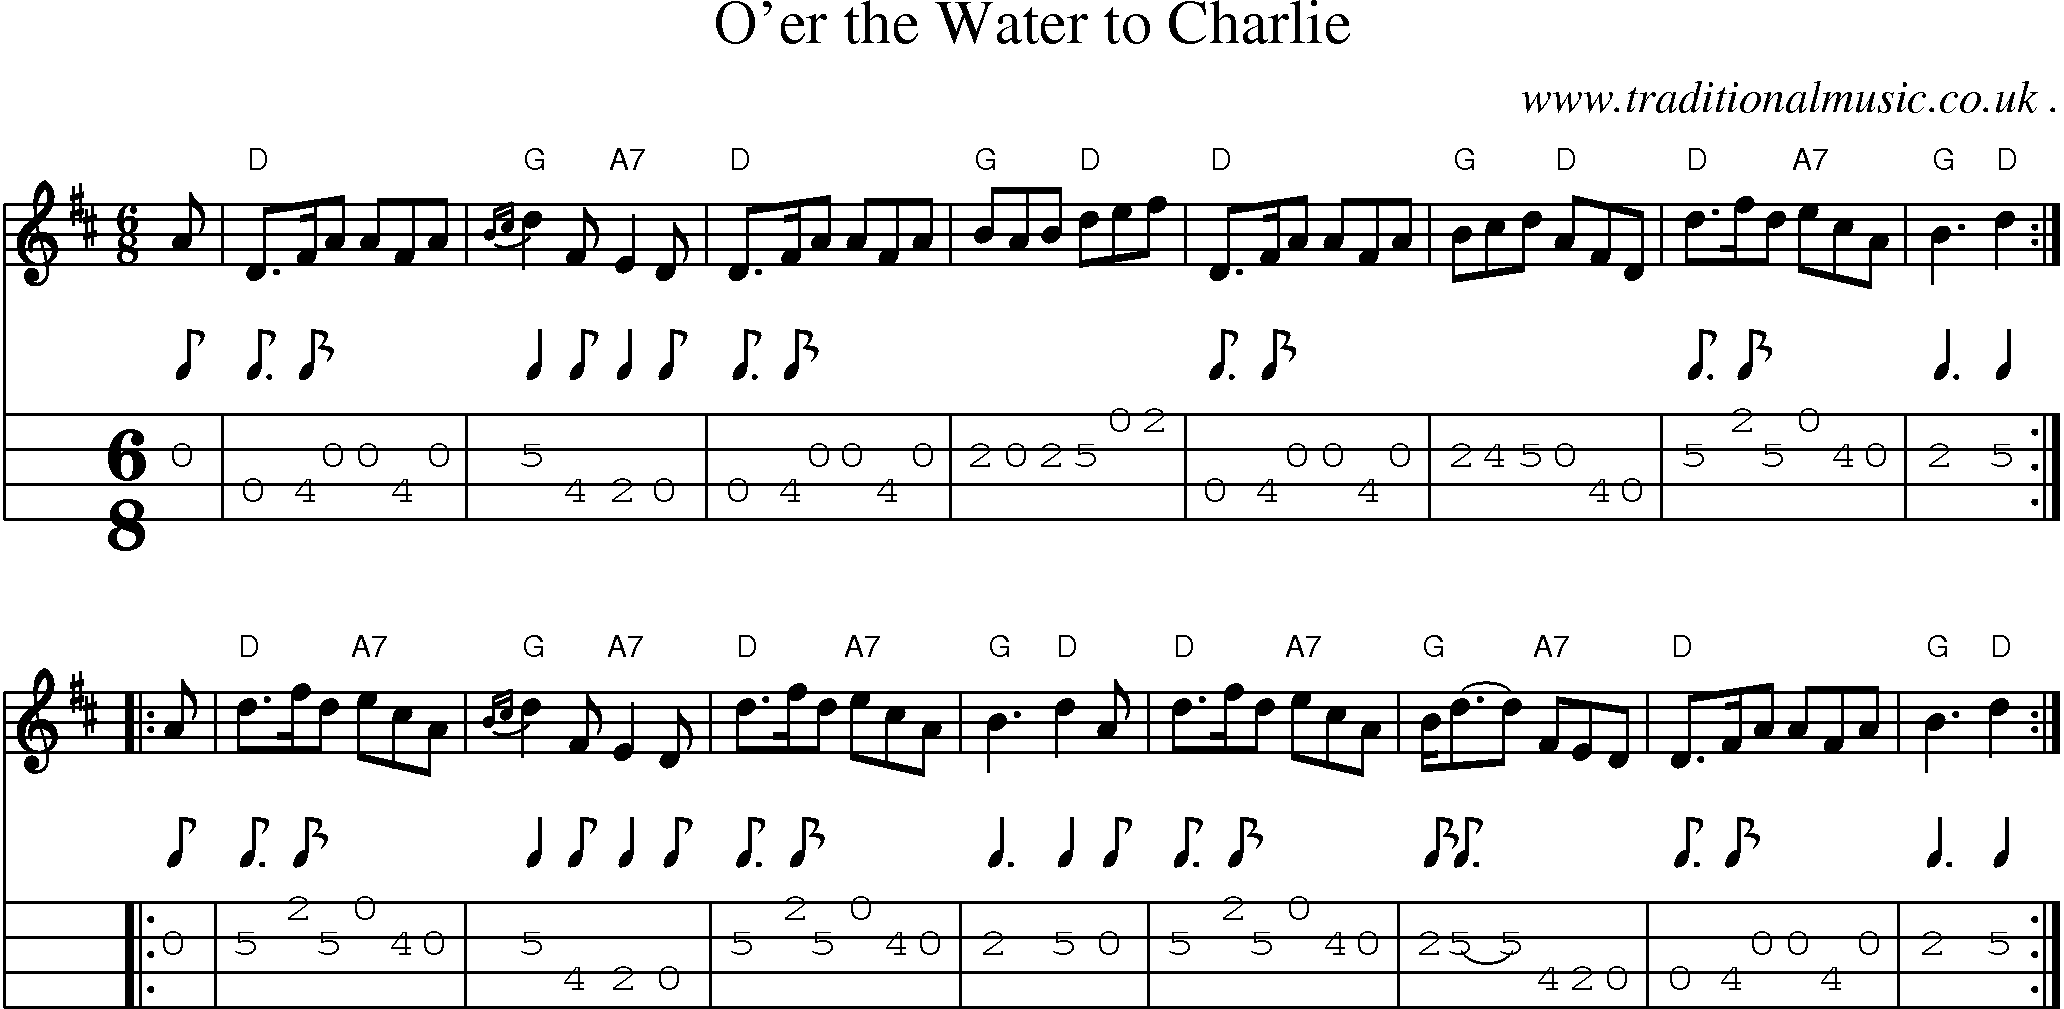 Sheet-music  score, Chords and Mandolin Tabs for Oer The Water To Charlie